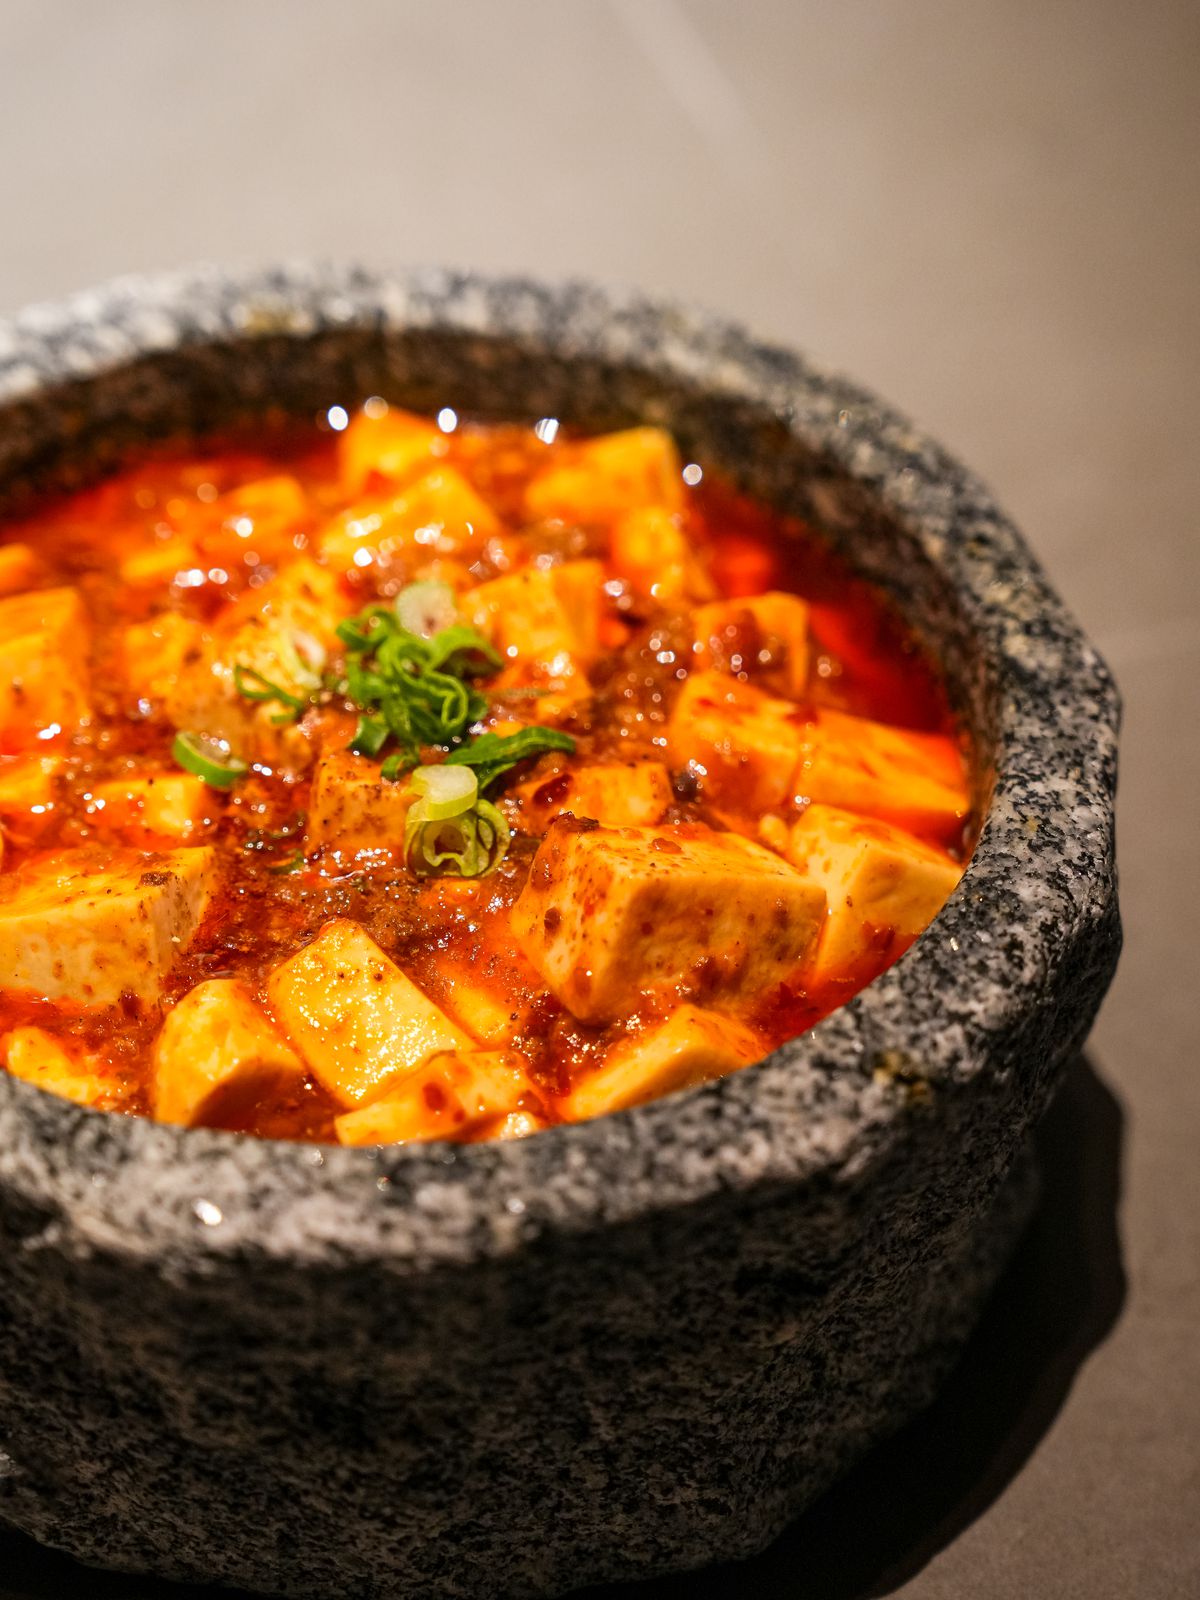 Mapo tofu in a textured black bowl.